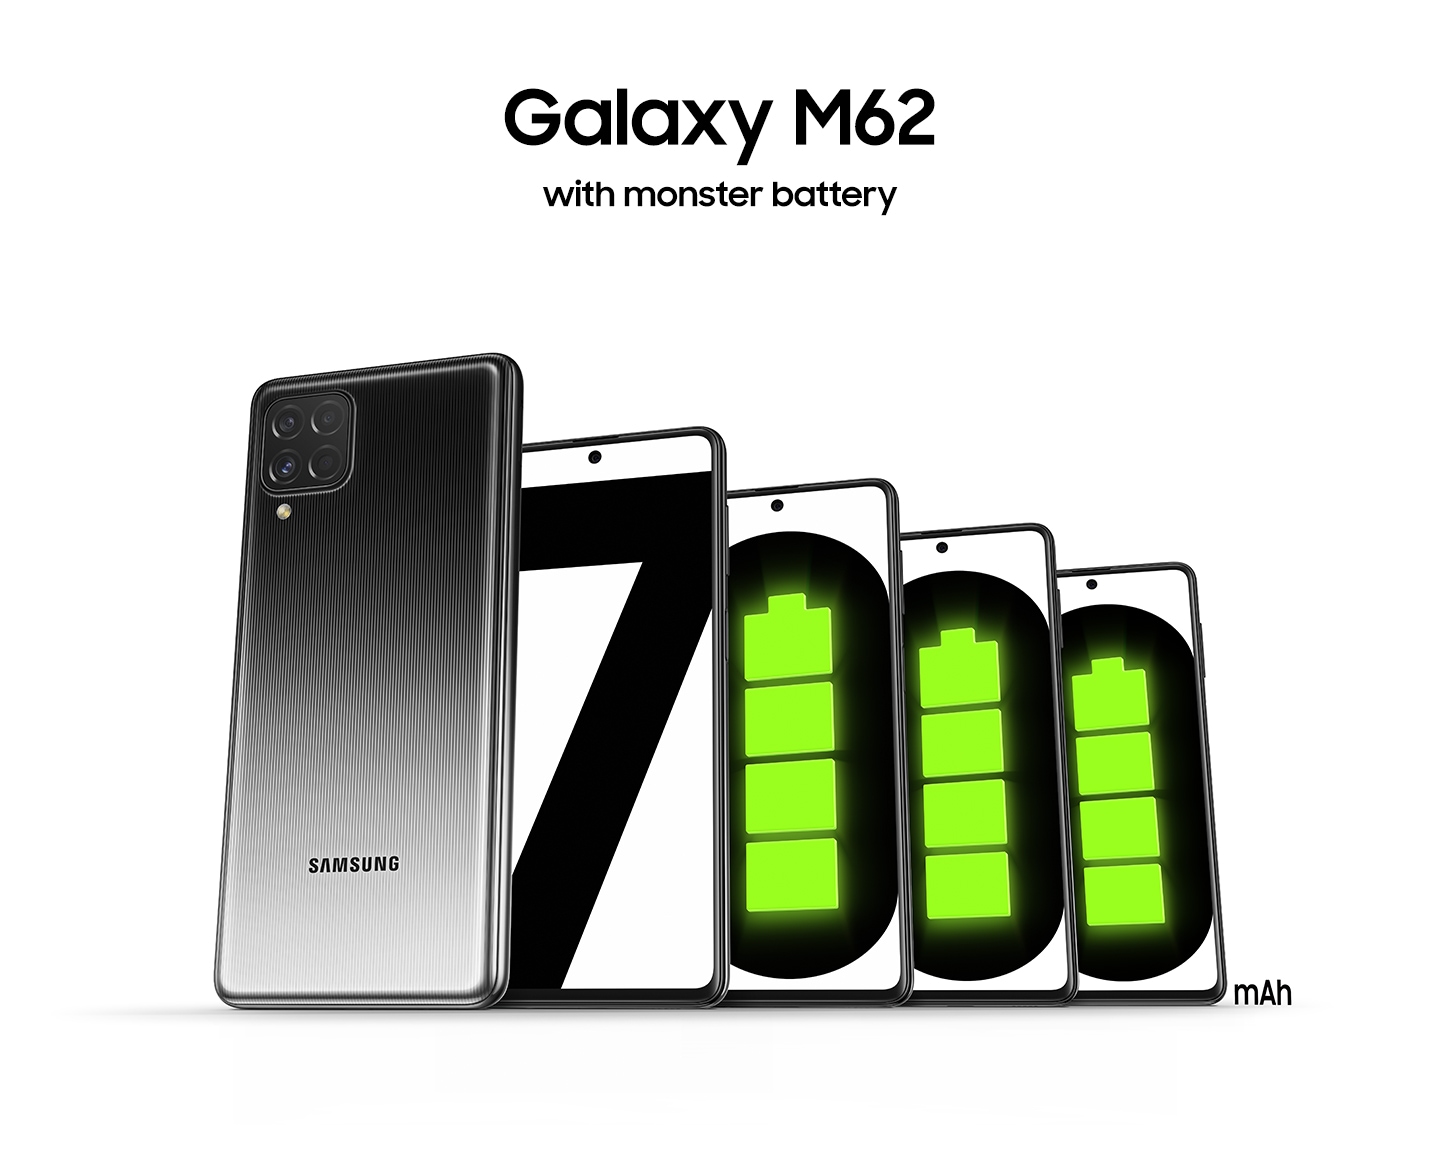 Back view of black Galaxy M62 and 4 front view of smartphones are standing side by side. Each 4 onscreens indicate the letter '7000' which means 7000mAh powerful battery in order, green full-battery icons fill the letter '0' brightly. The headline text 'Galaxy M62 with monster battery' is above these.